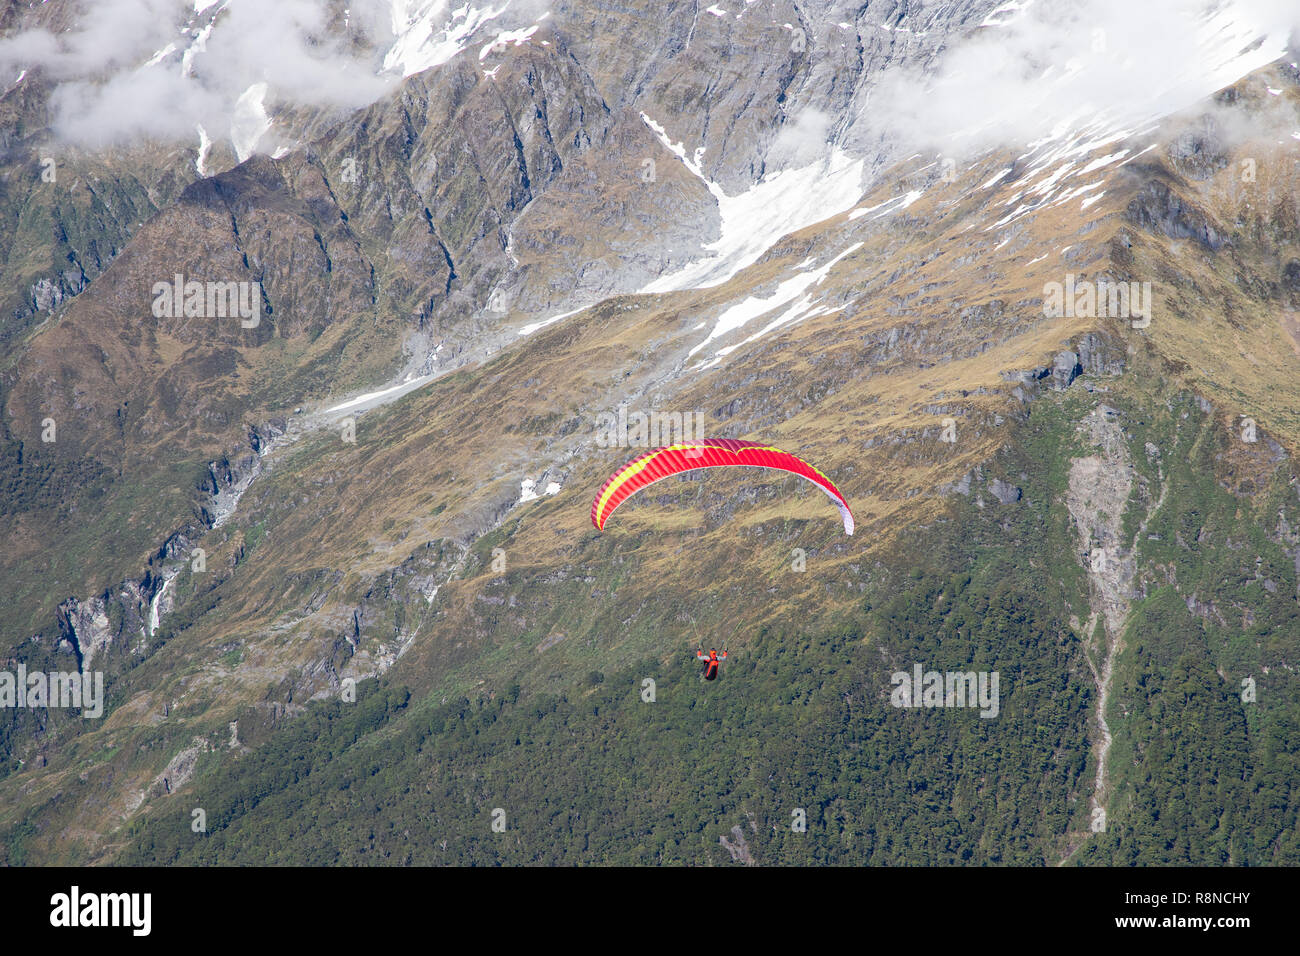 Paraglider flying in National Park, New Zealand Stock Photo